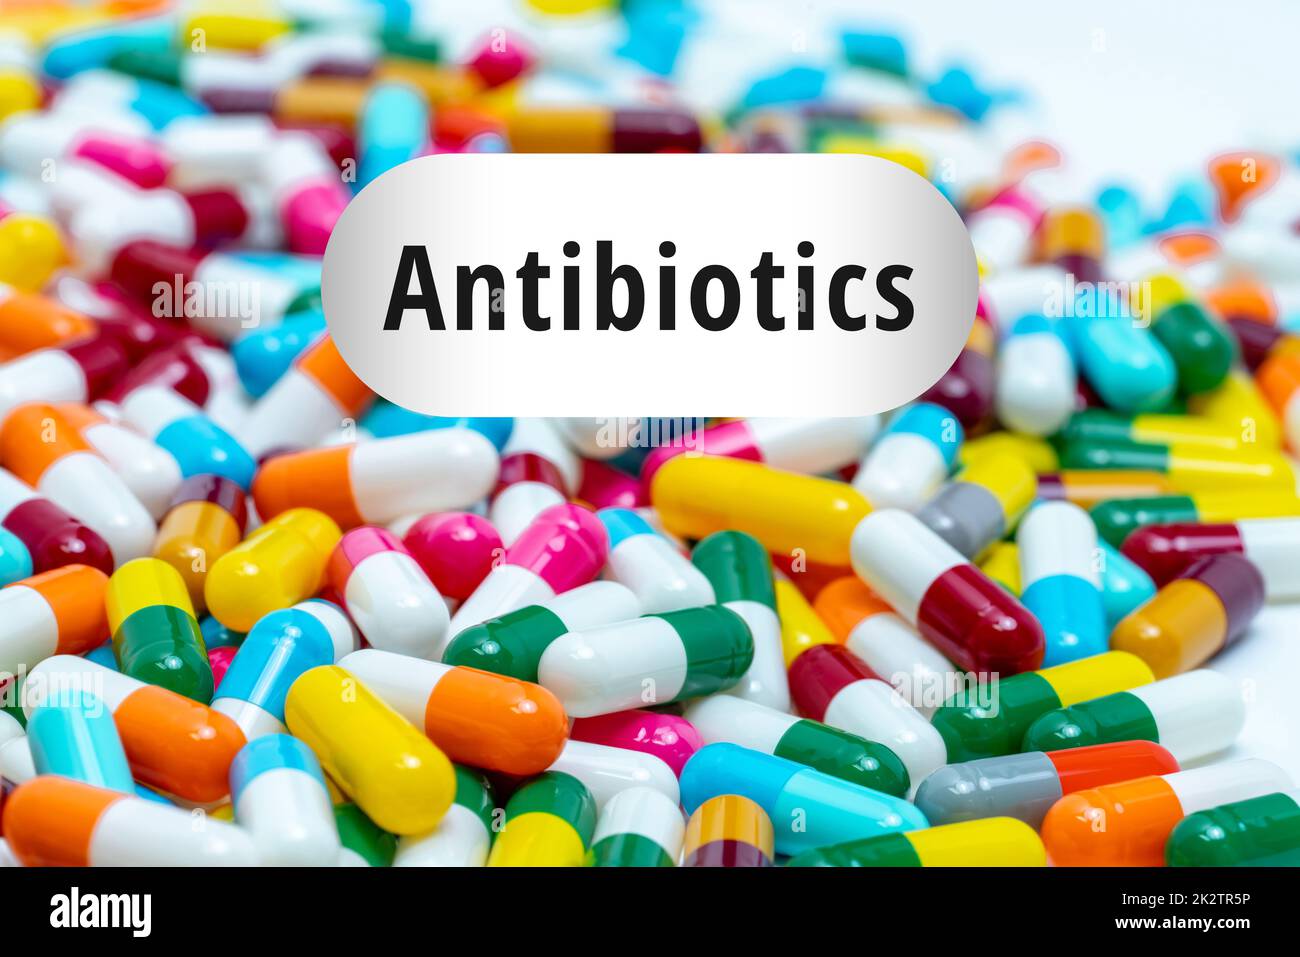 Pile of multi-colored antibiotics capsule pills. Antibiotic drug resistance concept. Prescription drugs. Superbug concept. Antibiotic drug use with reasonable. Pharmacology of antimicrobial drugs. Stock Photo